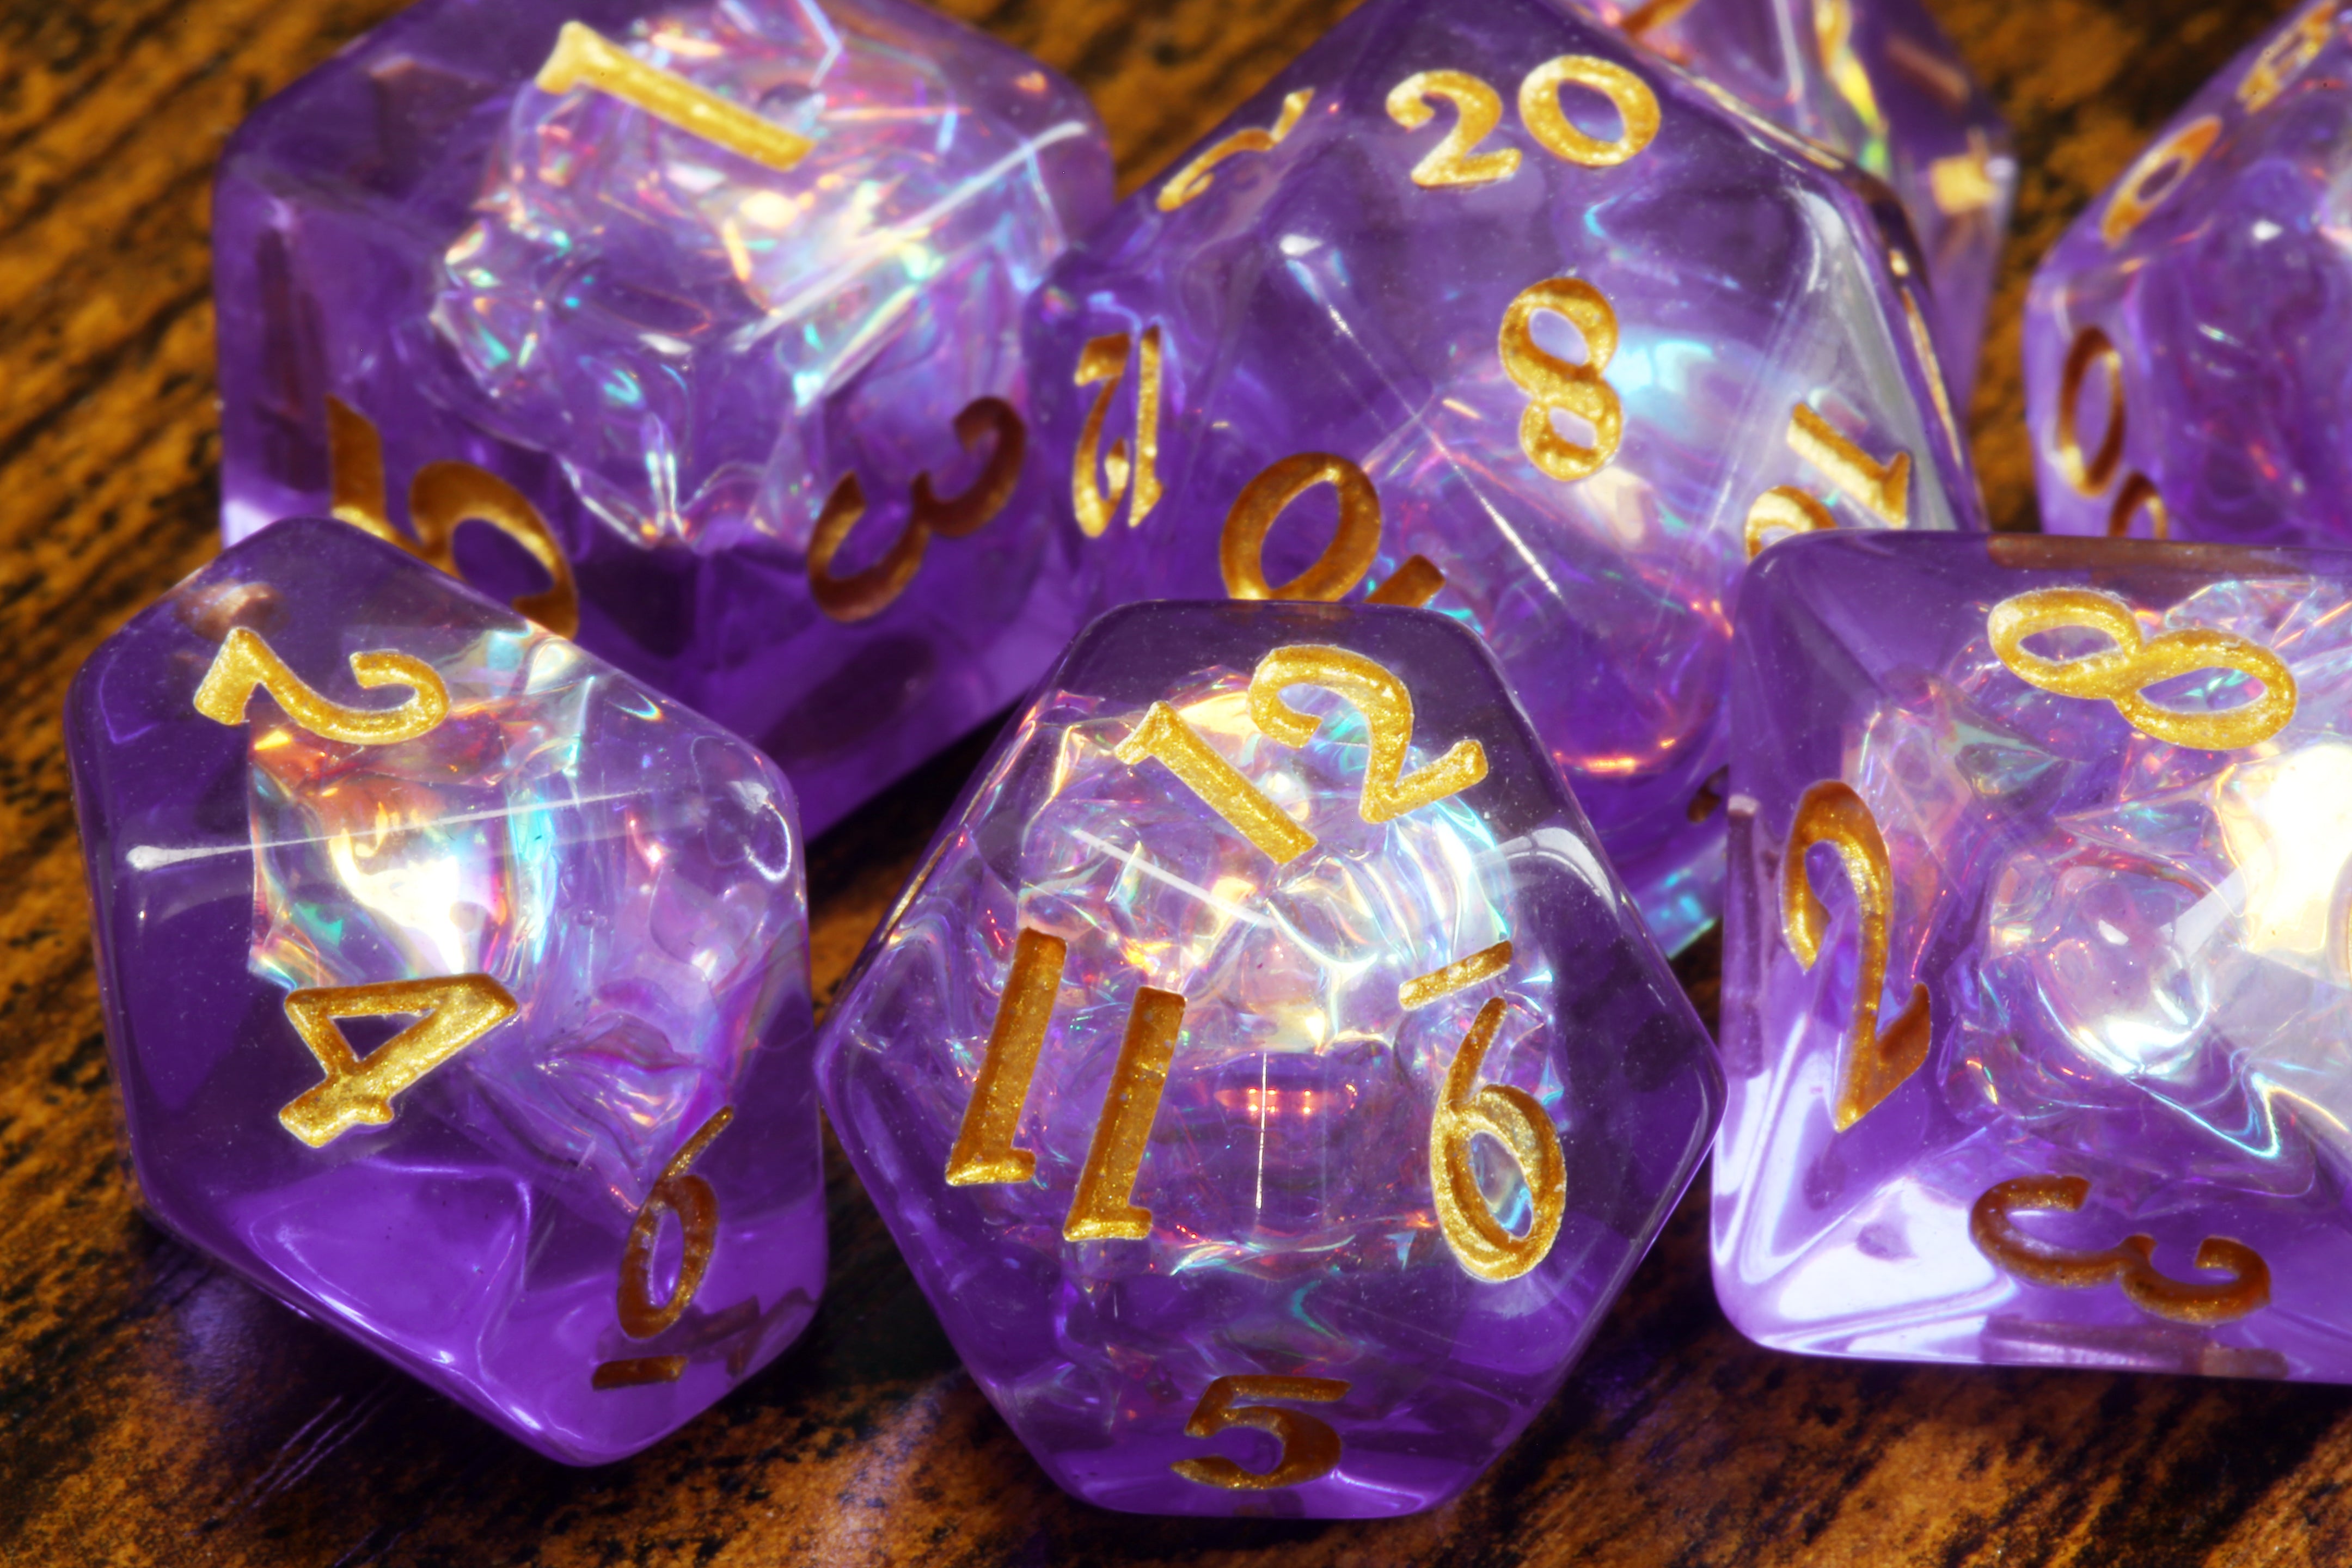 Mystic opal 8 pieces dice det - Purple with Holographic inclusions - The Wizard's Vault